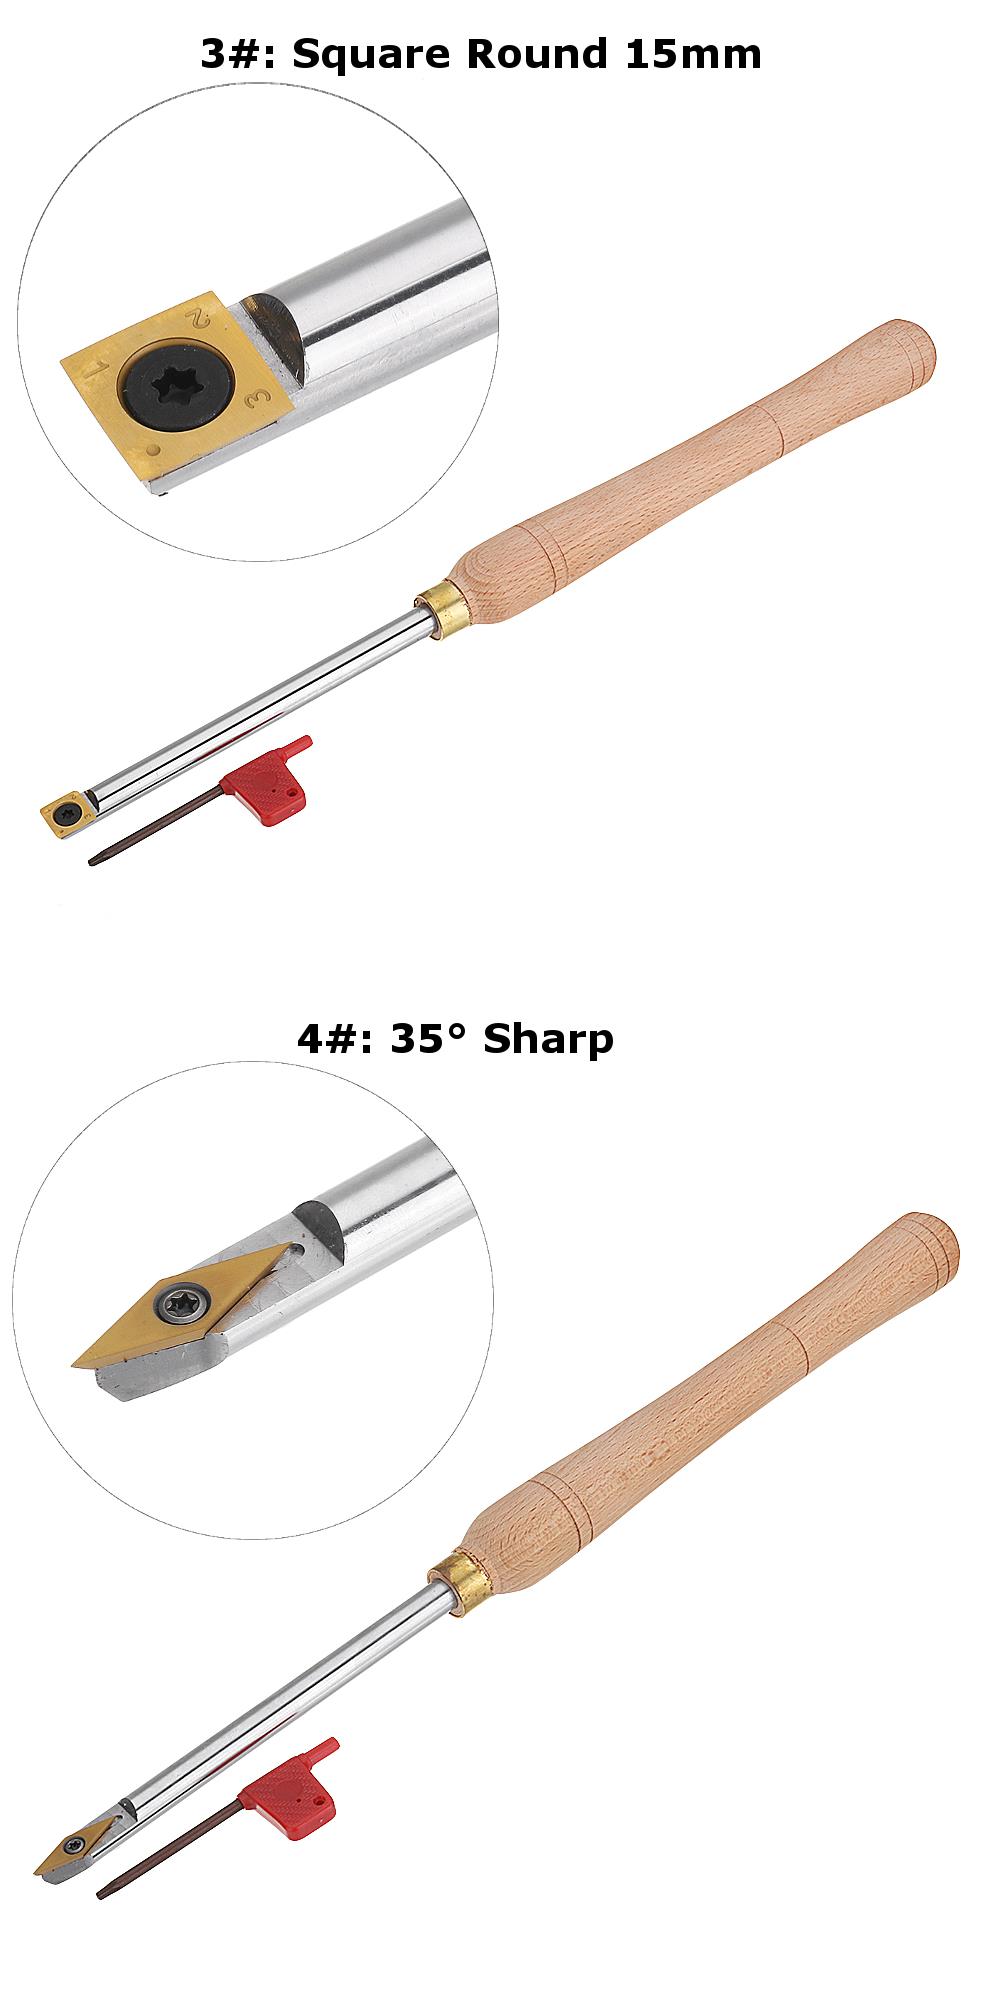 Drillpro-Wood-Turning-Tool-Wood-Handle-with-Titanium-Coated-Wood-Carbide-Insert-Cutter-Round-Shank-W-1456447-4